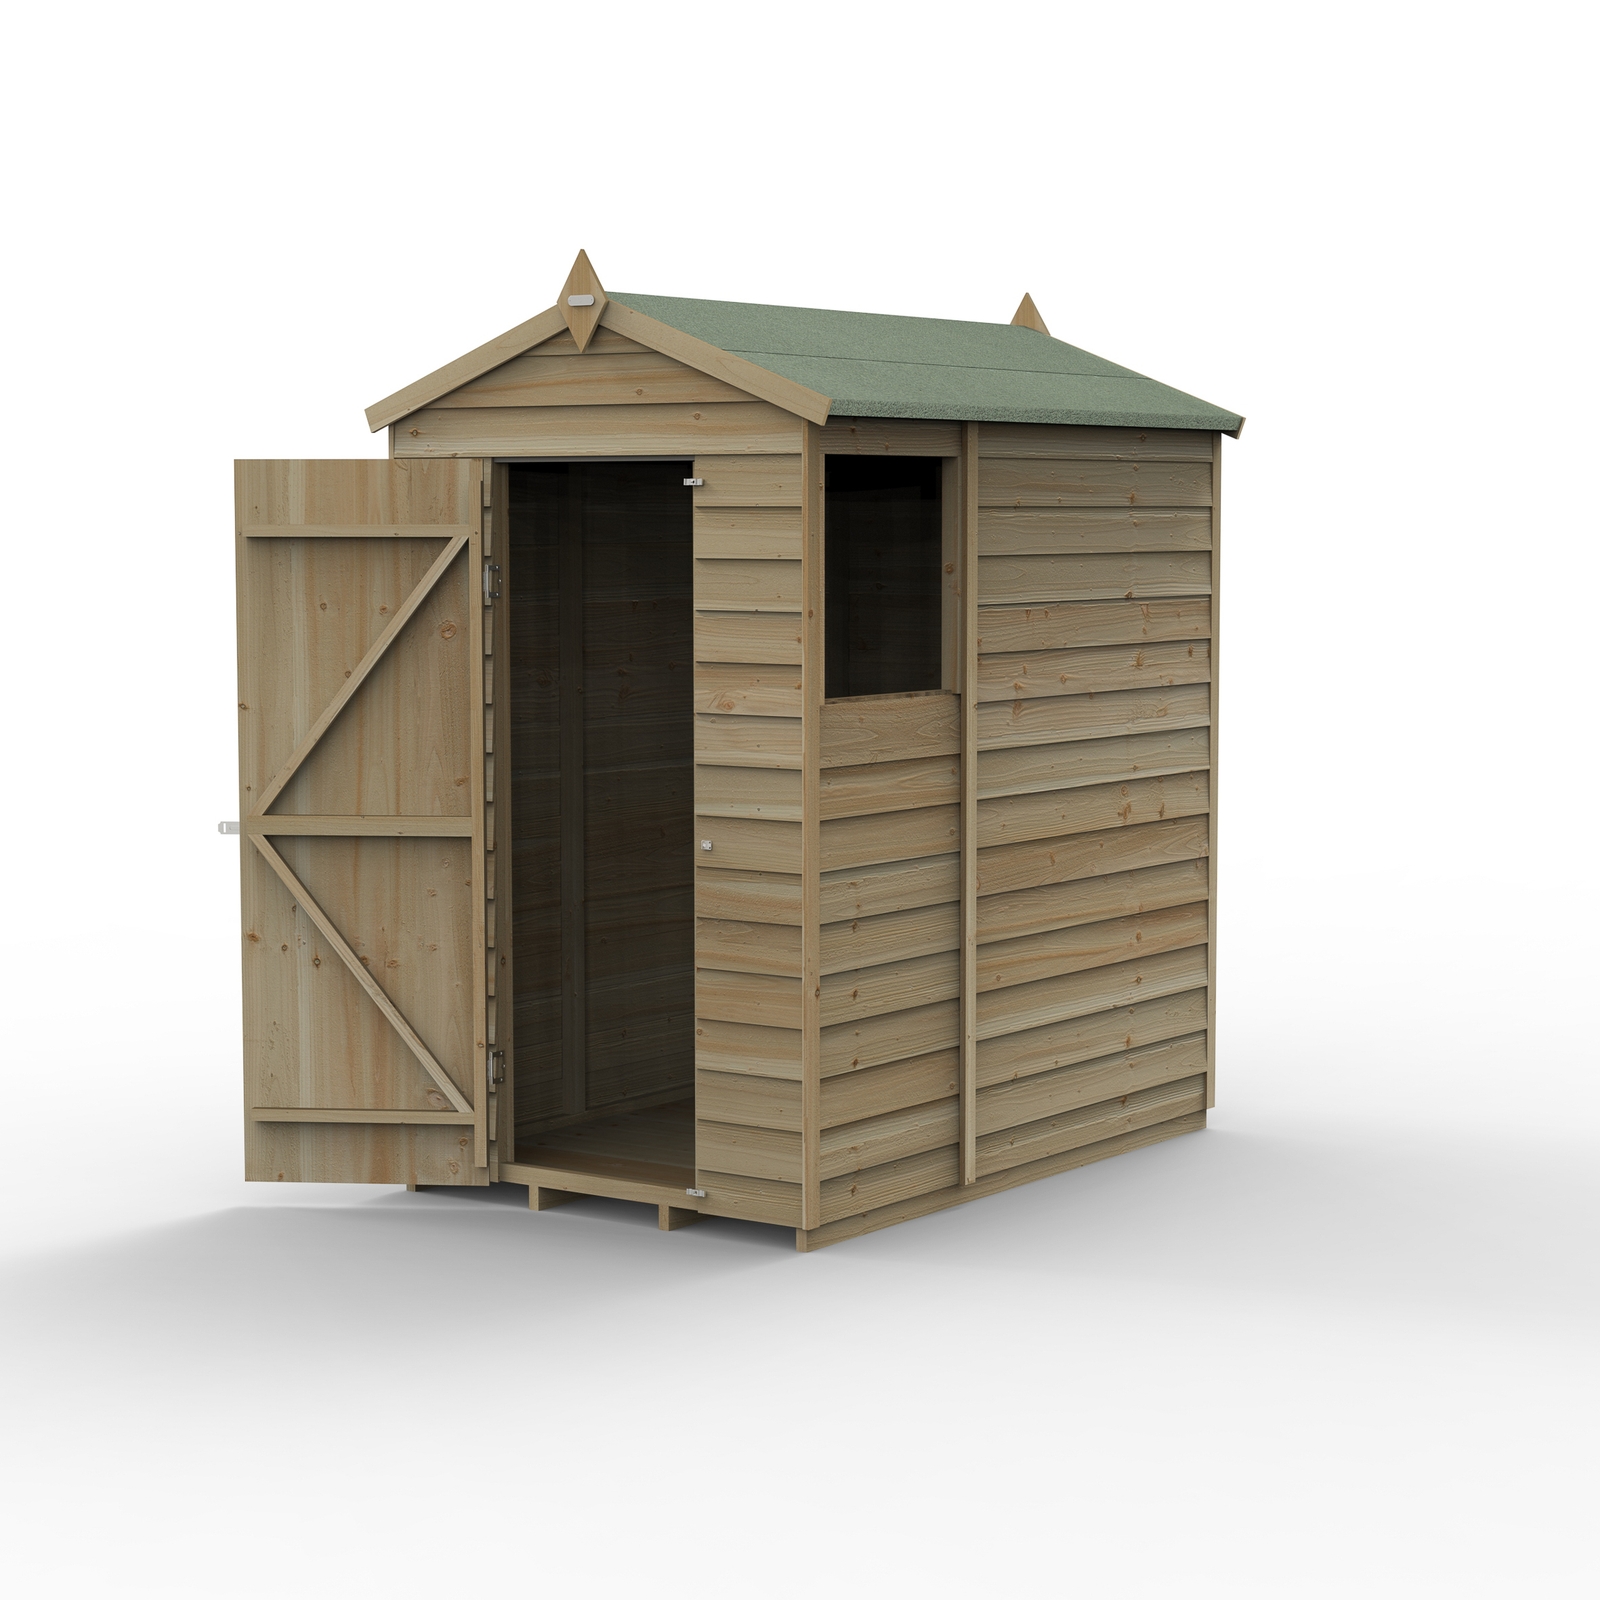 Forest Garden 4LIFE Apex Shed 4 x 6ft - Single Door 1 Window (Home Delivery)